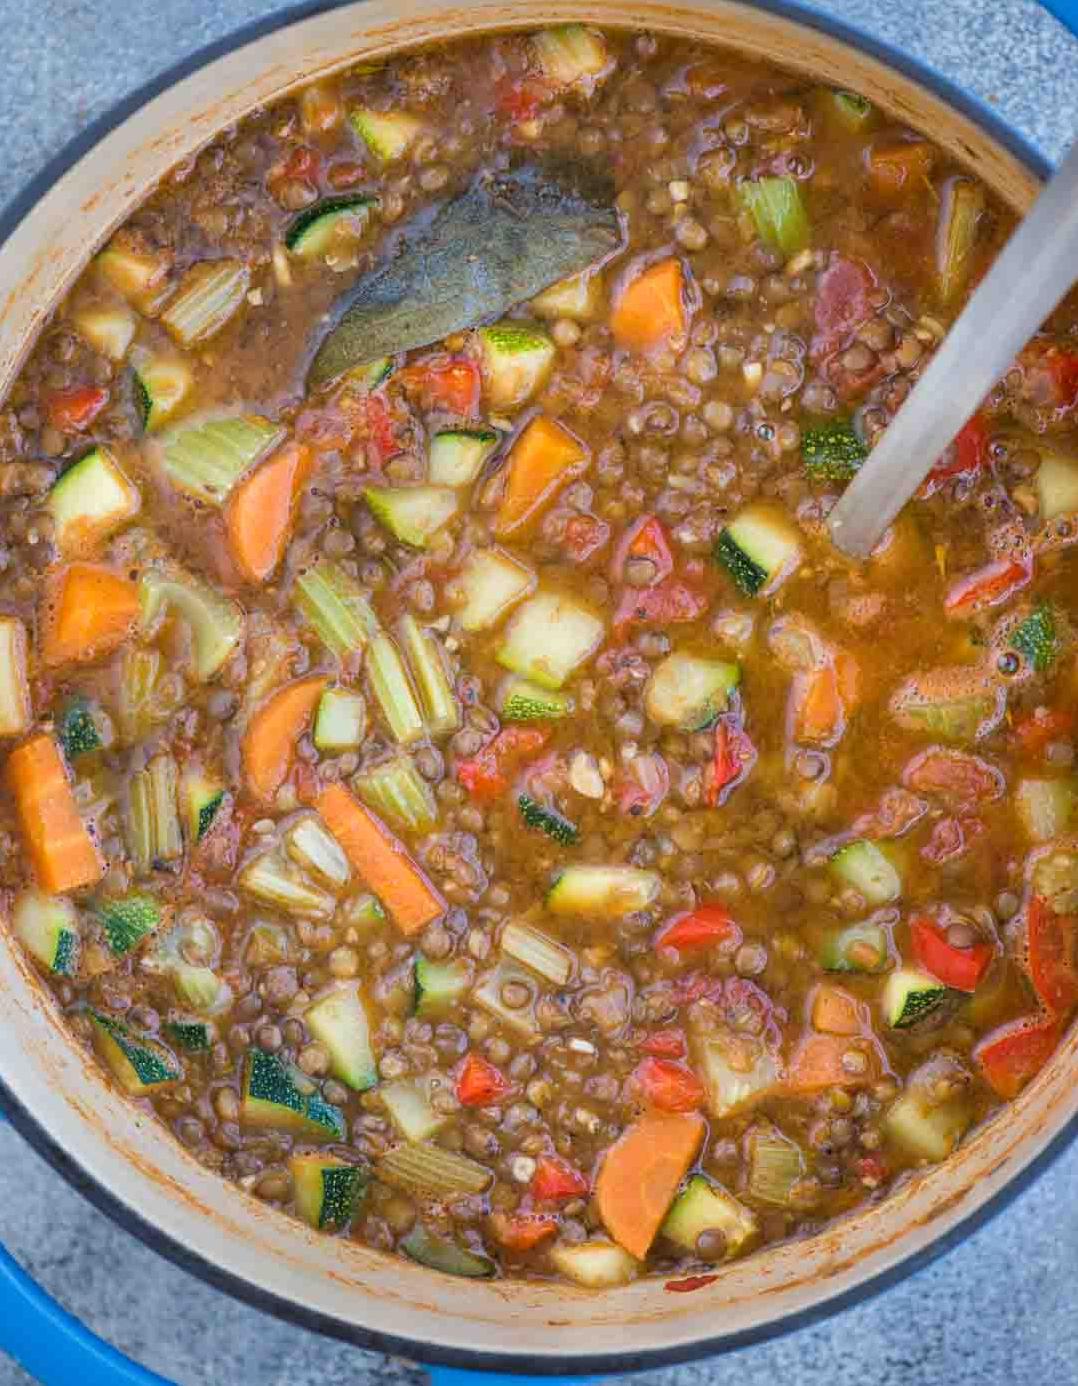  This stew is so easy to make and perfect for a busy weeknight dinner.